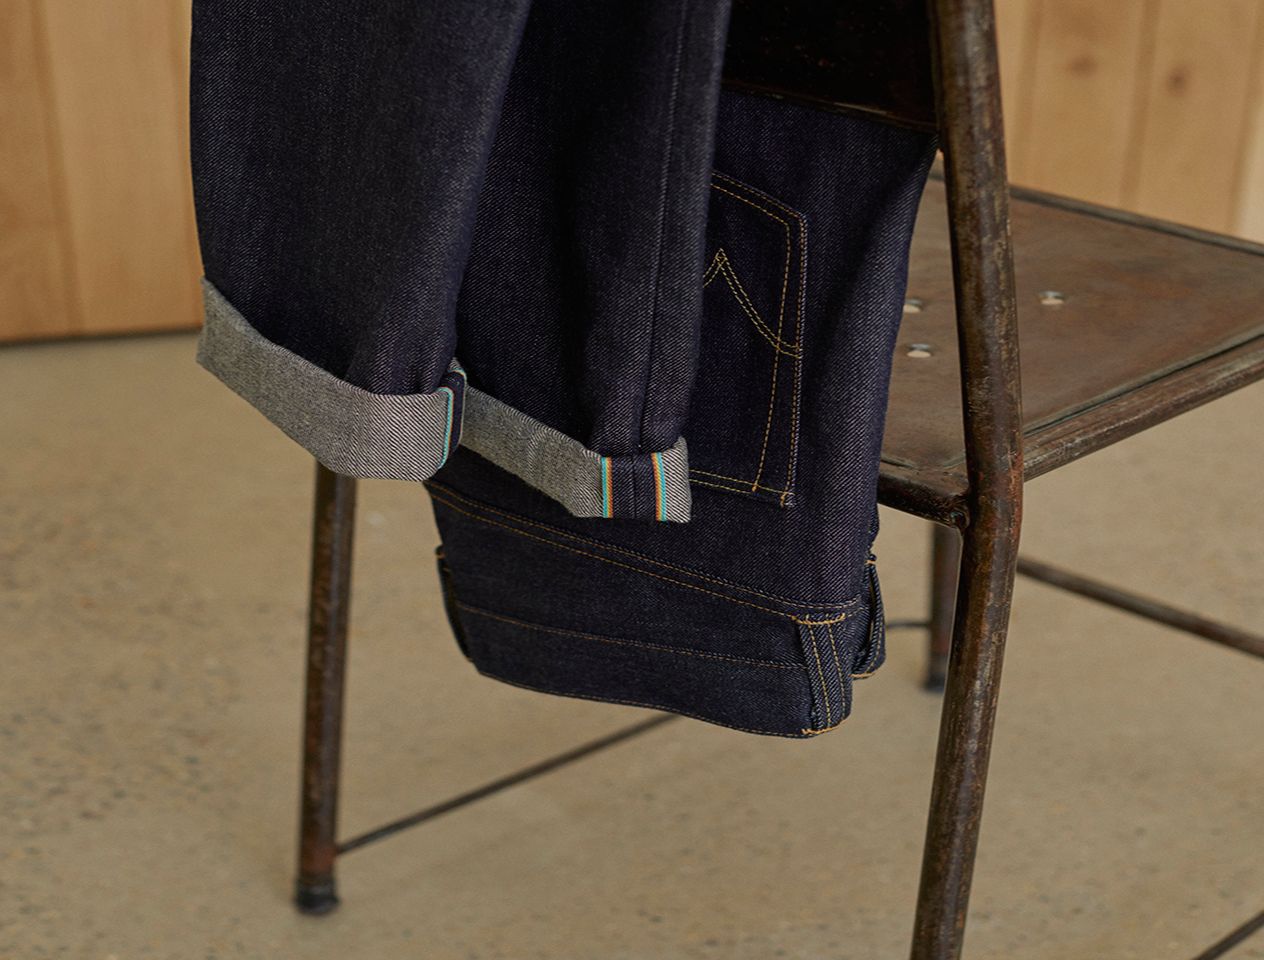 How EDWIN Selvage Denim got even better — Genius Clothing and